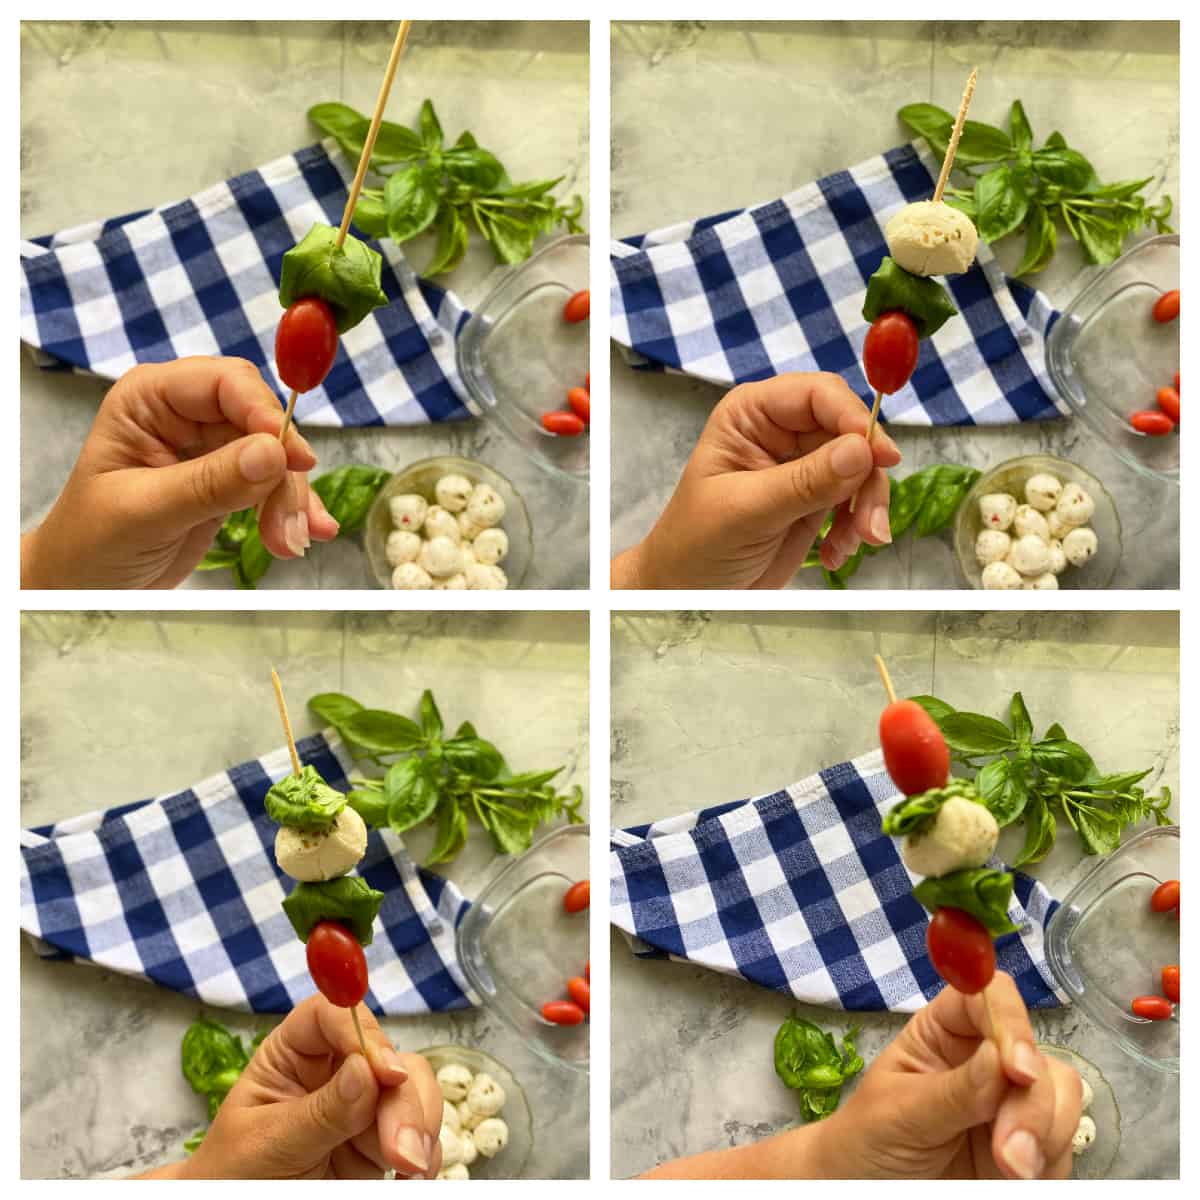 Four steps showing how to skewer grape tomatoes, mini mozzarella and basil leavess.